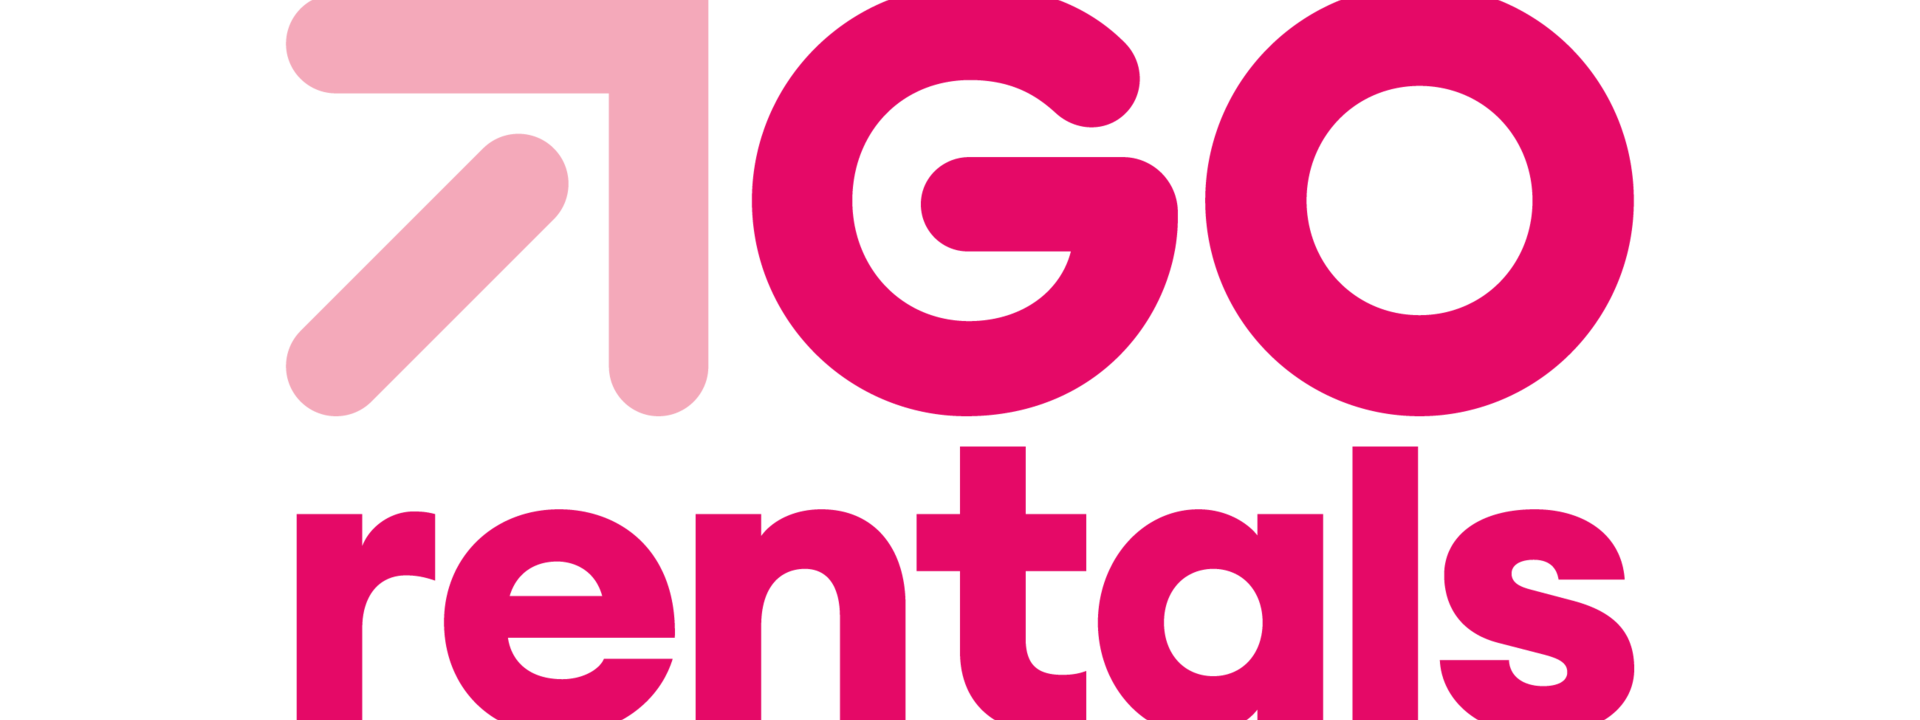 GORE1005_GORentals_Logo_Pink_AW_STACK SMALL_1.png